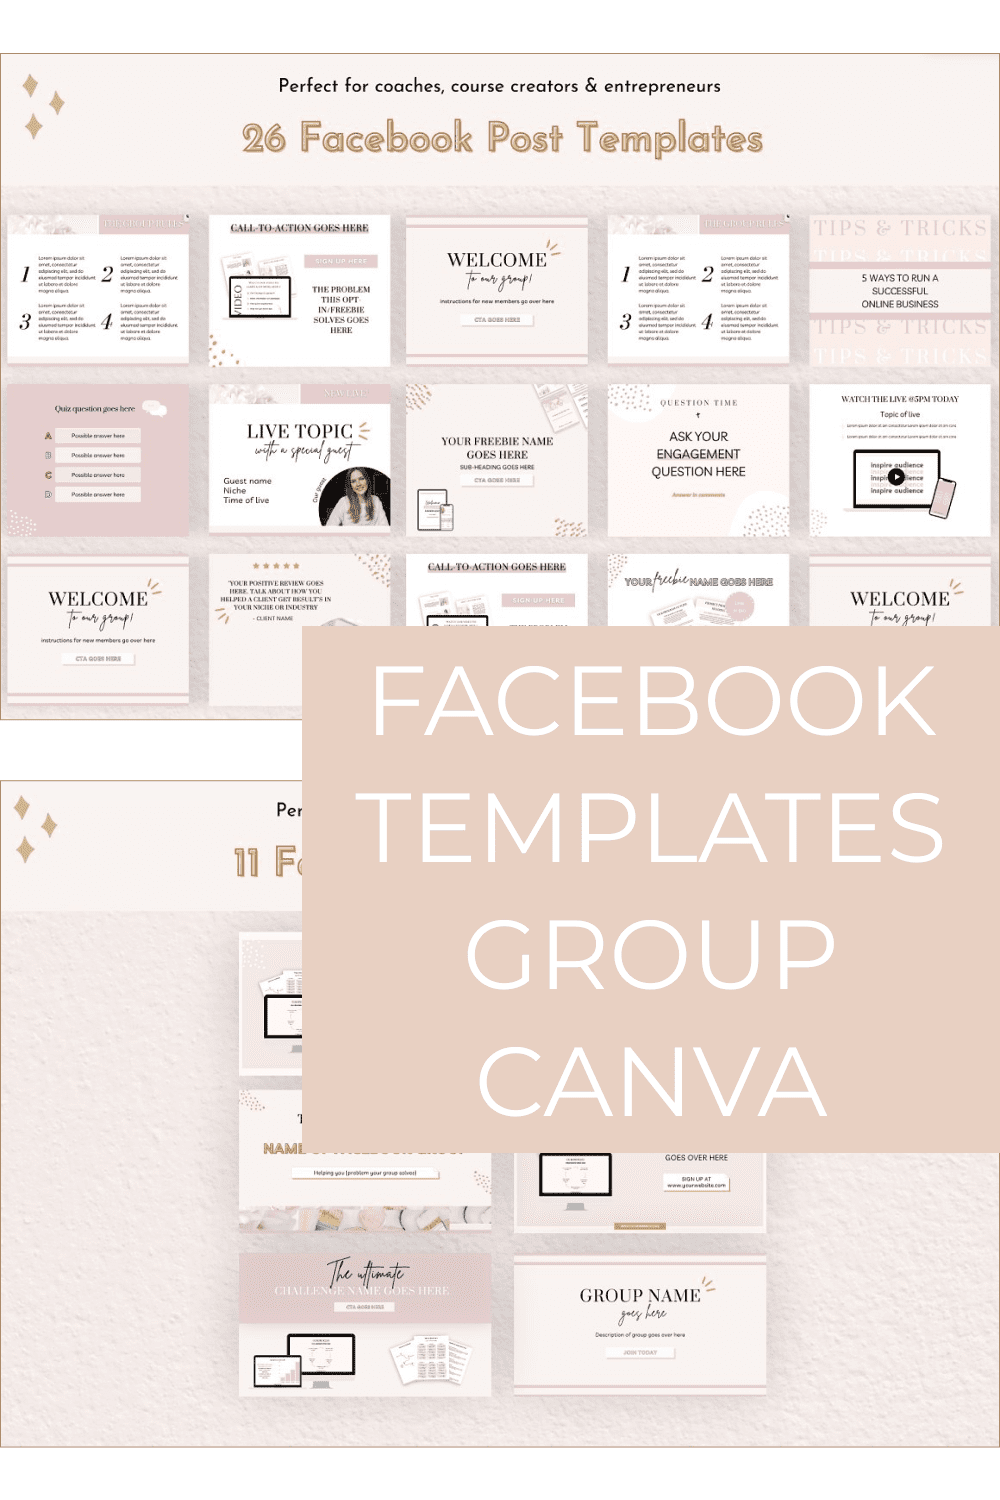 This is a big collection of facebook templates.